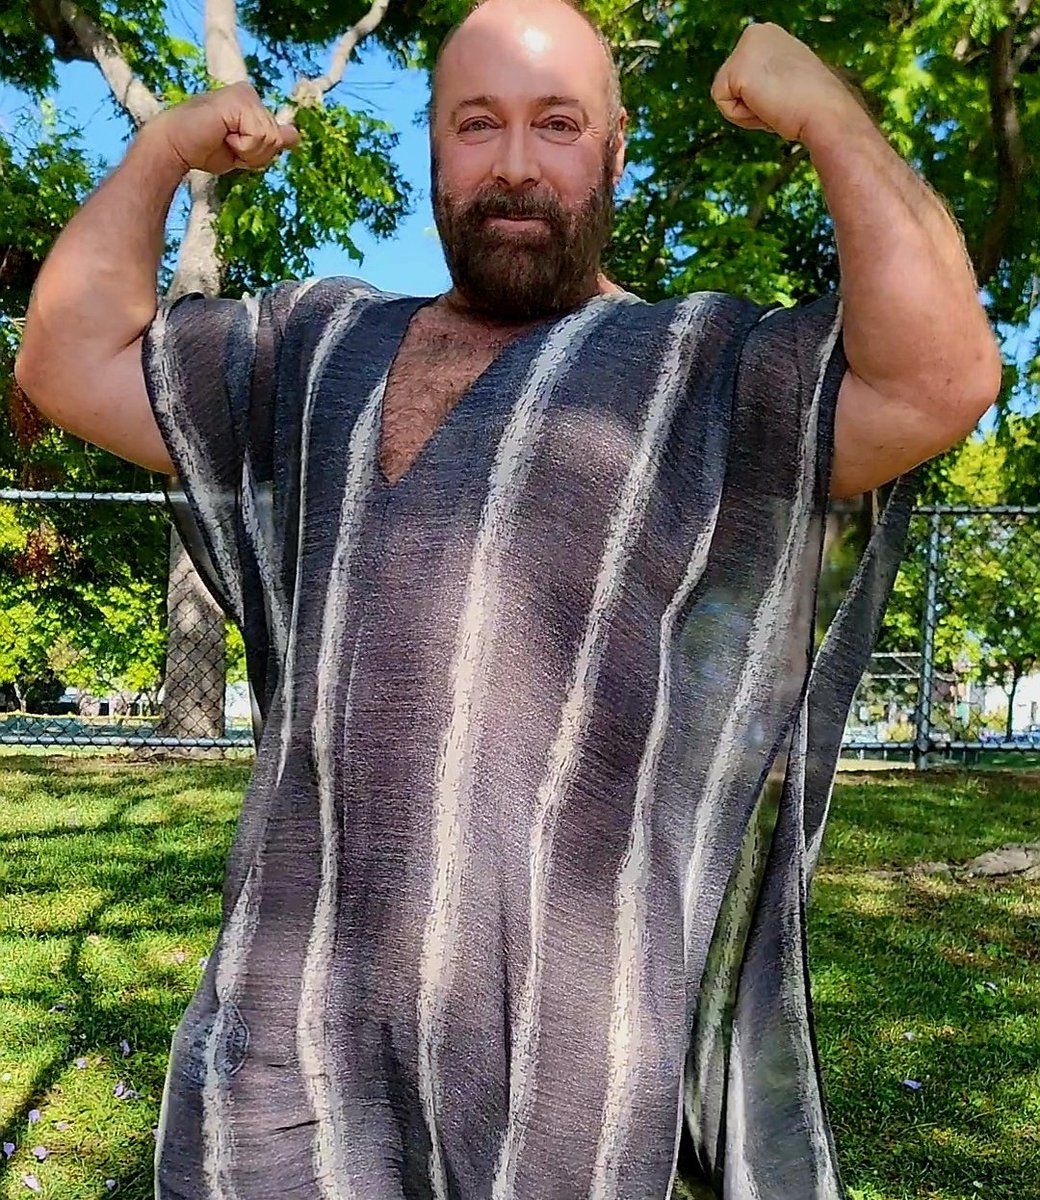 I got to meet the veer sexy @BradKalvo this weekend. Here he is in the new grey version of the Atlantic House, now available on our website. Check it out at bearlycoveredclothing.com #gaybear #gaybeards #gayfashion #gaytwitter #PRIDE #mensfashion #musclebear #DADDYGAY